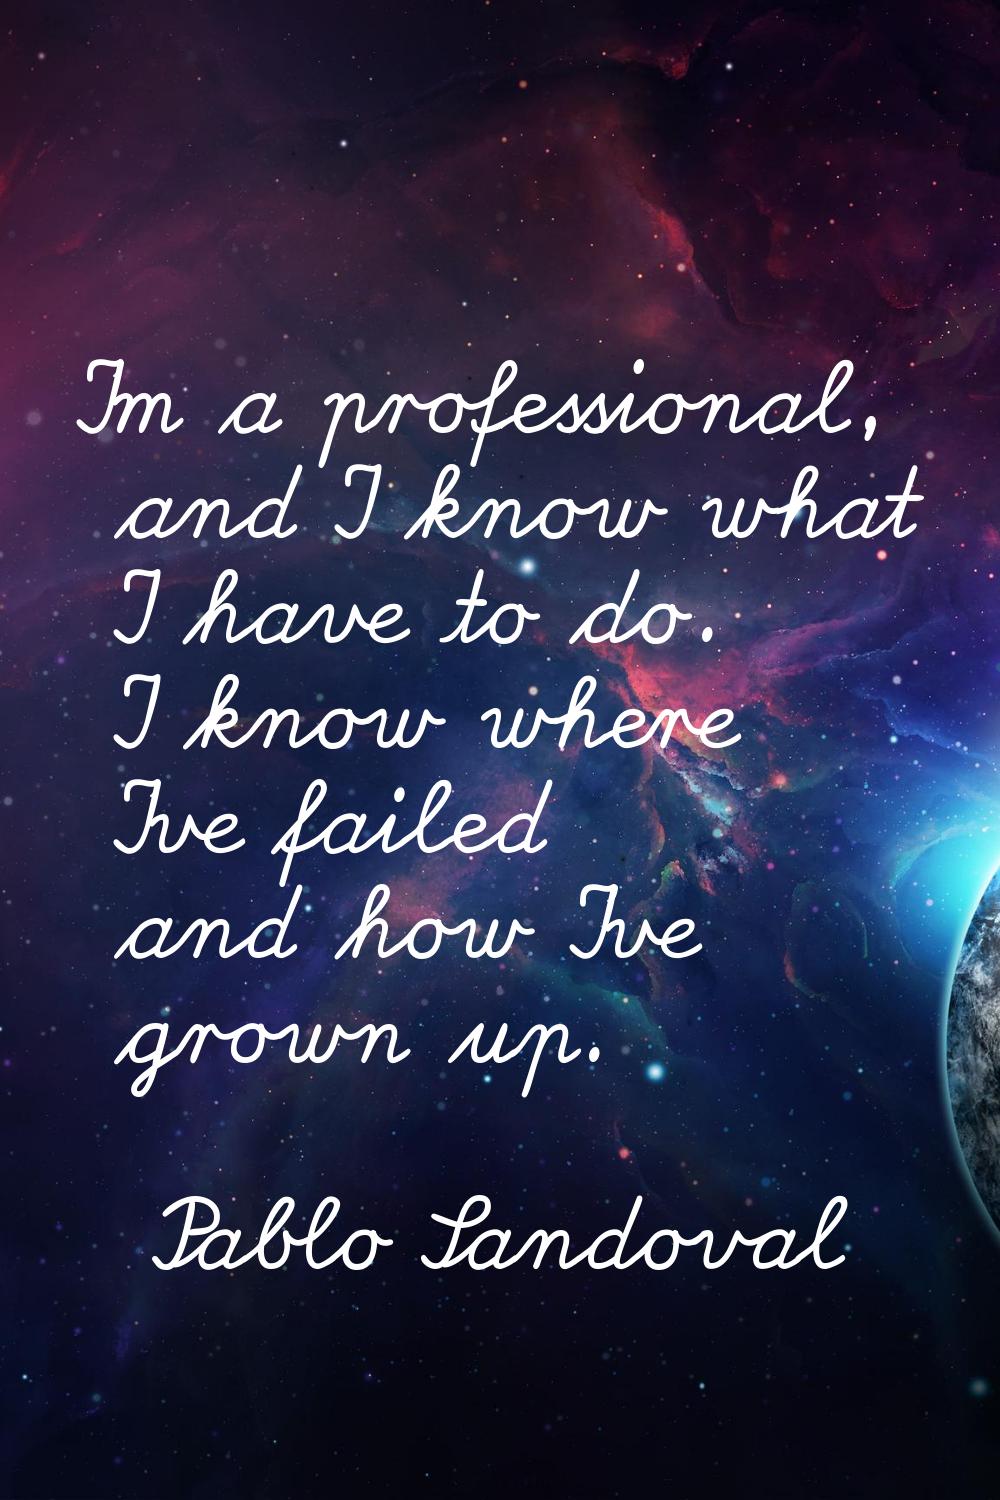 I'm a professional, and I know what I have to do. I know where I've failed and how I've grown up.